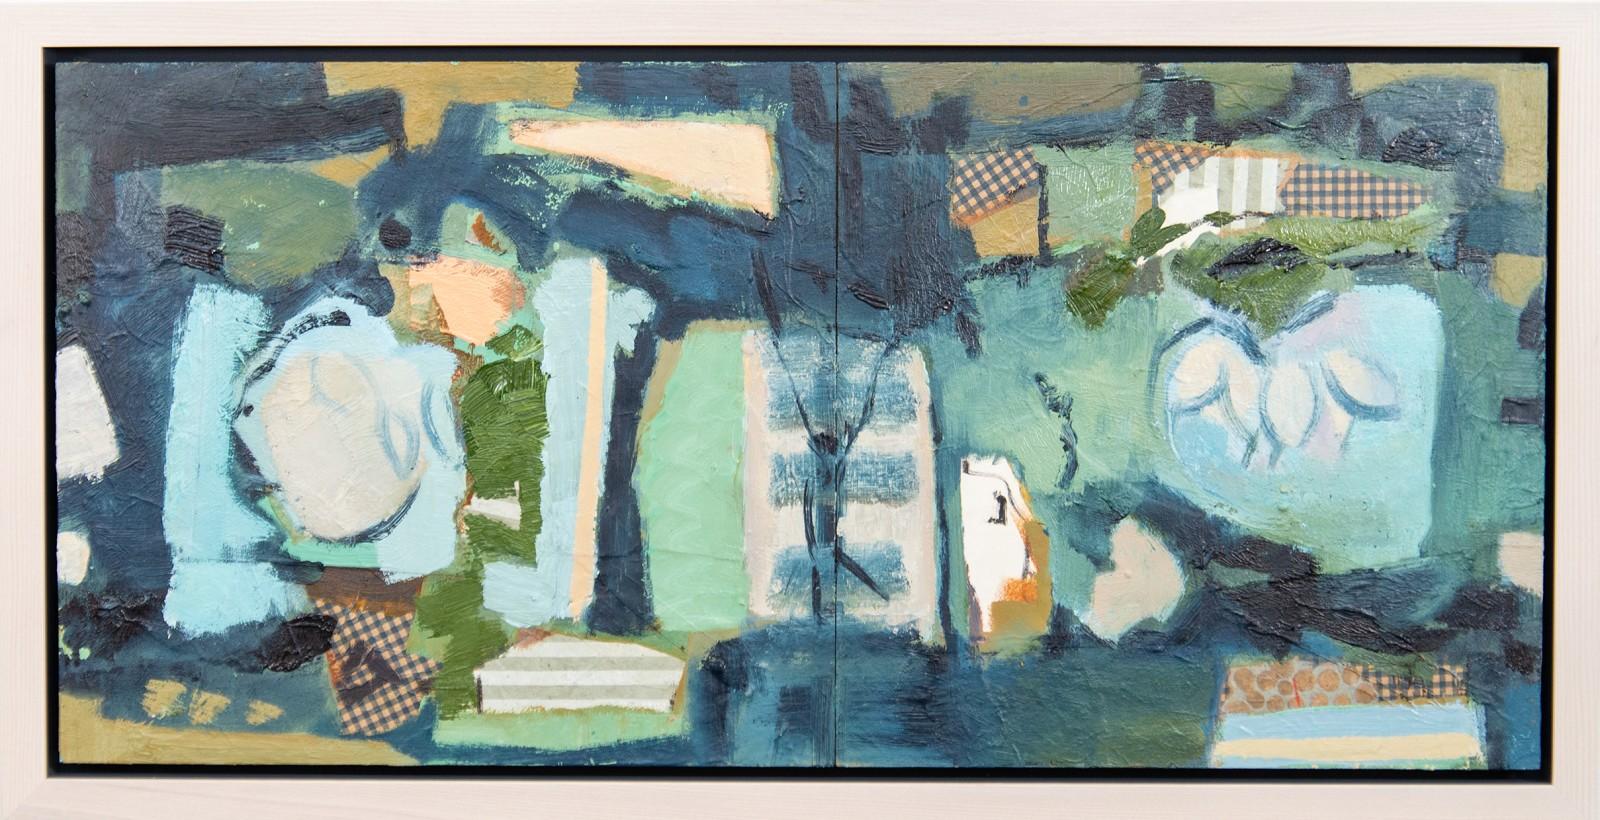 Diptych in Blue and Green - small ochre, cyan, abstract collage and oil painting - Mixed Media Art by Jennifer Hornyak